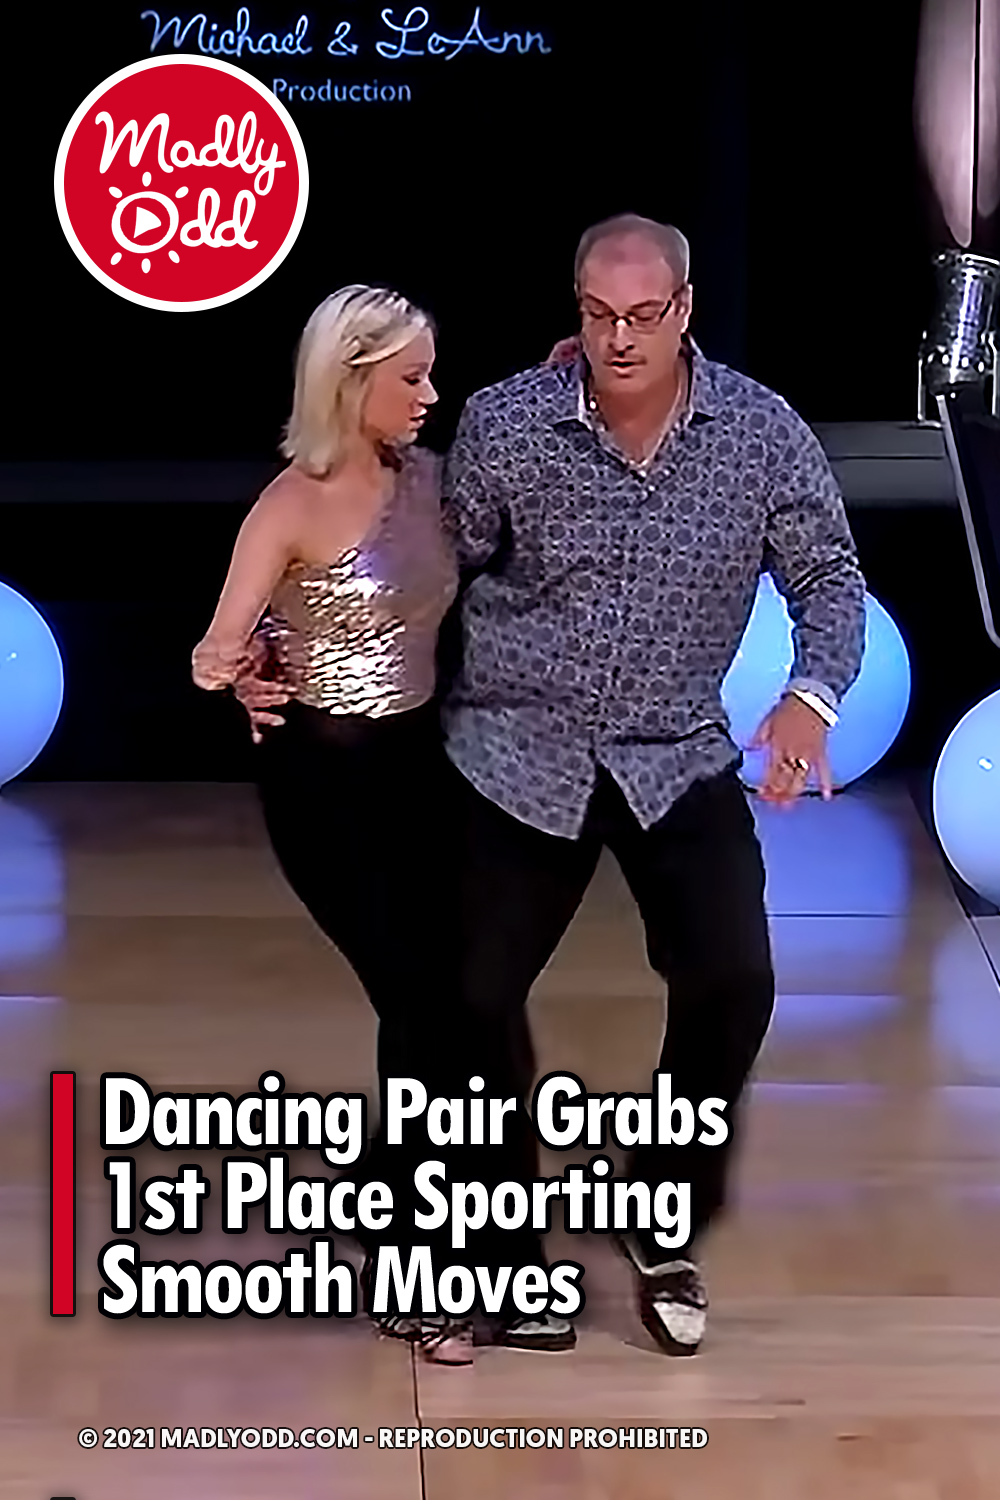 Dancing Pair Grabs 1st Place Sporting Smooth Moves